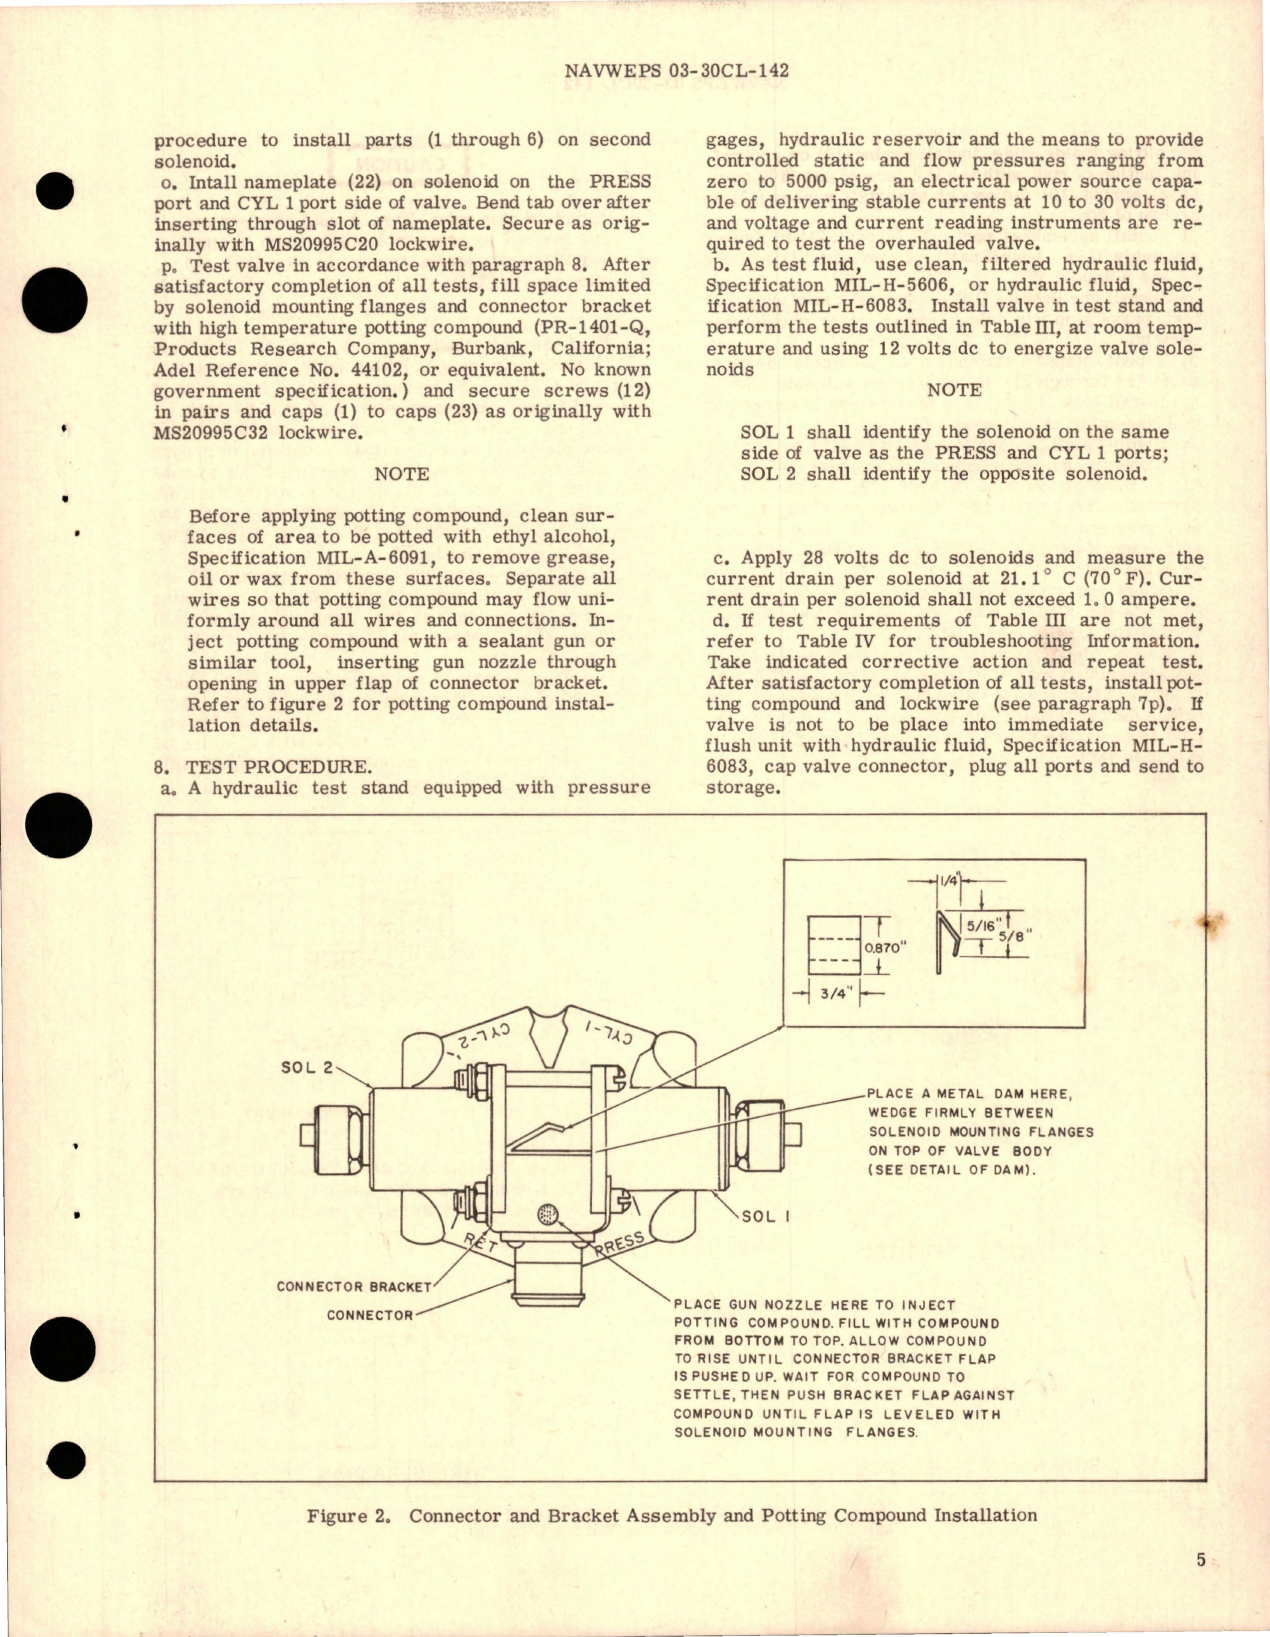 Sample page 5 from AirCorps Library document: Overhaul Instructions w Parts for 4-Way 3-Position Directional Control Valve - Part 70377